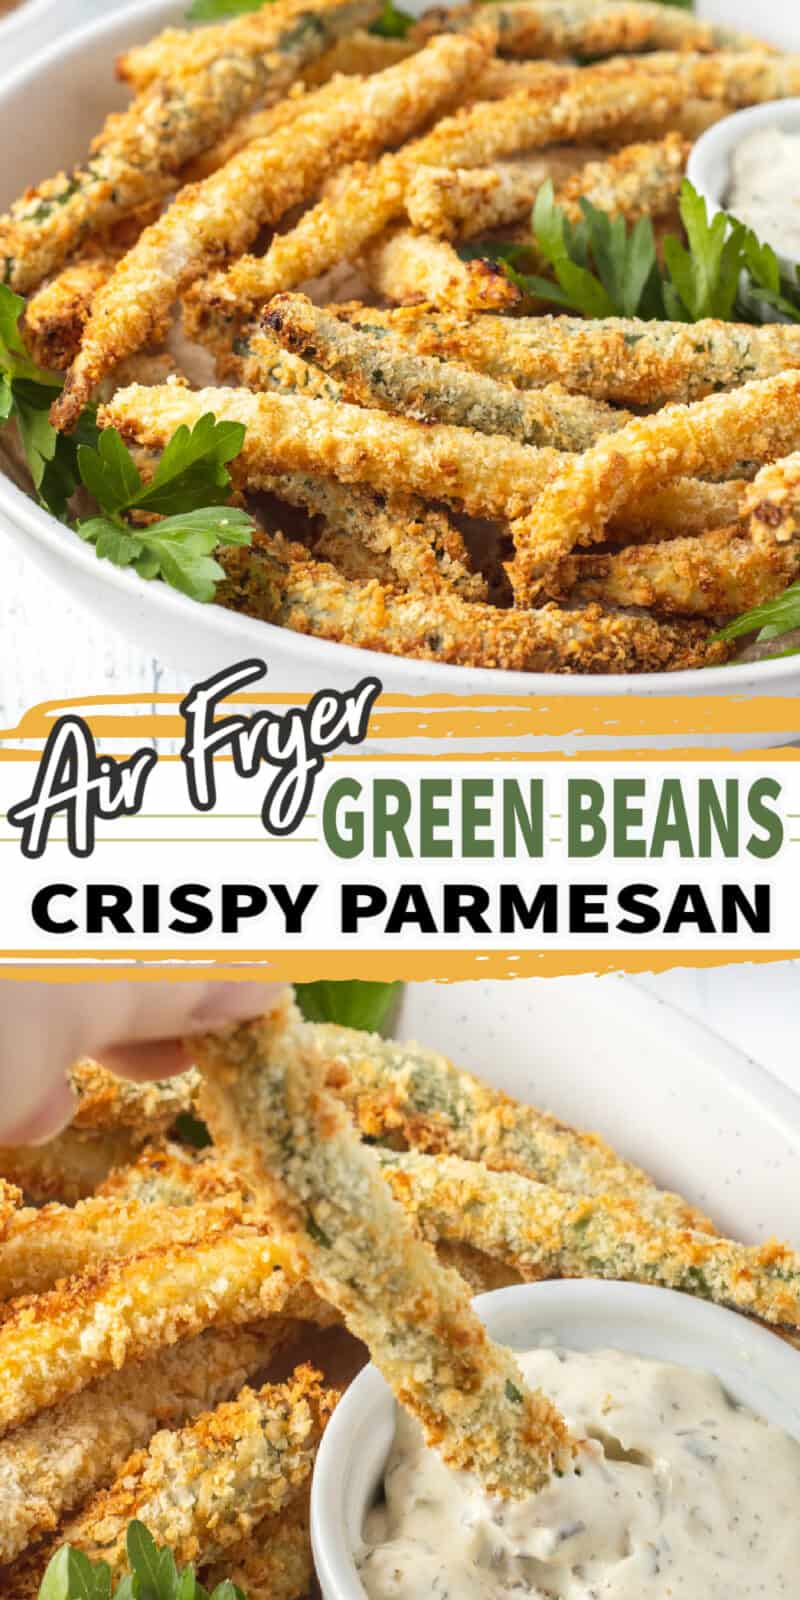 air fryer green beans in a white bowl with text